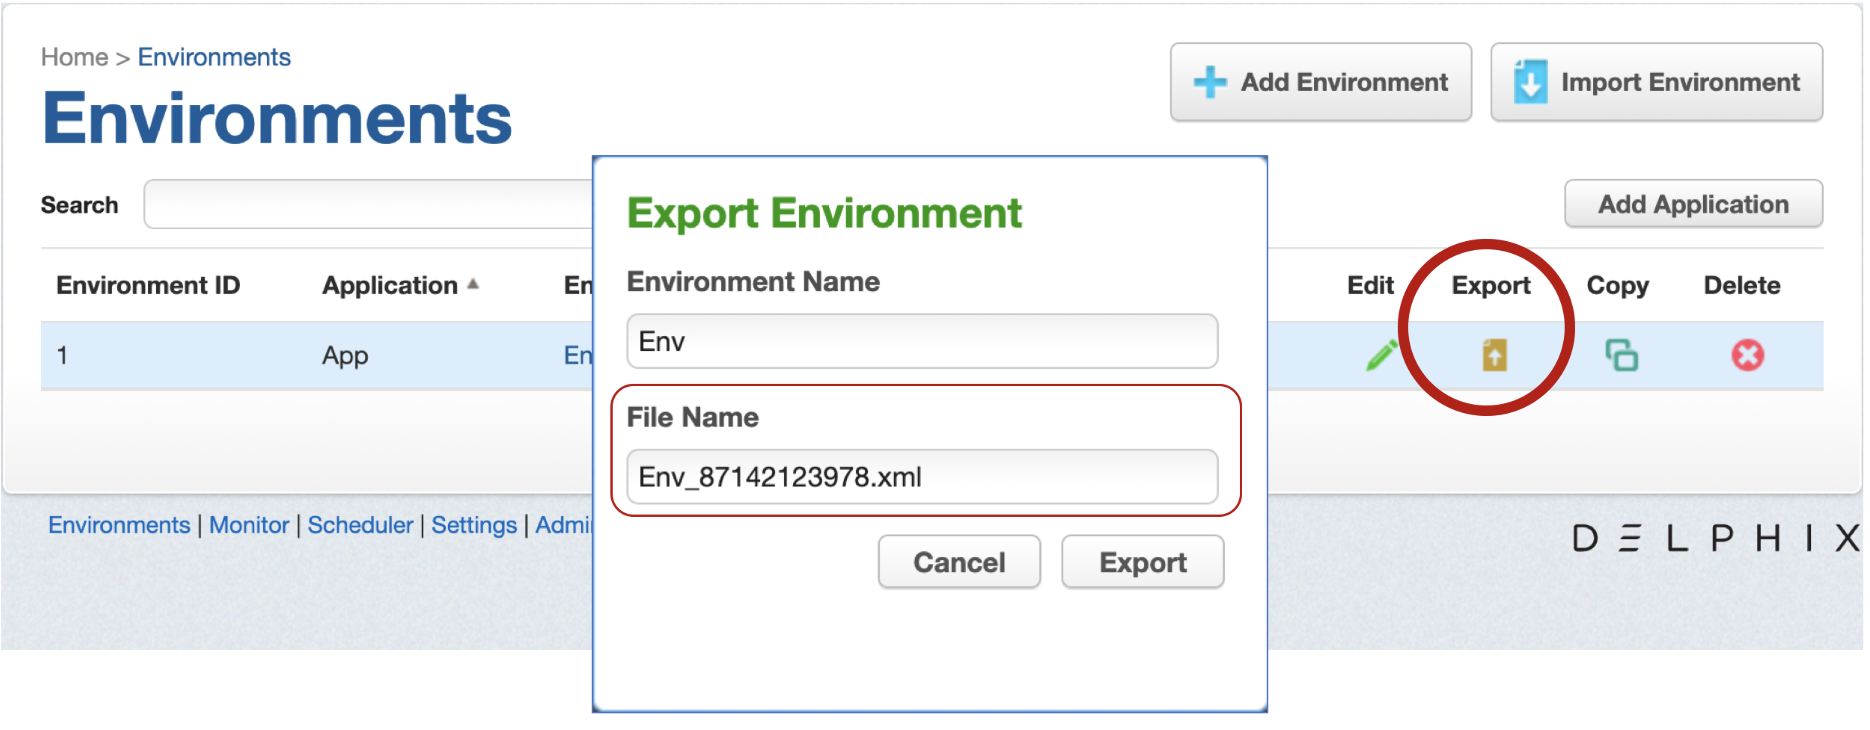 UI - Environment Page w Export Popup.png